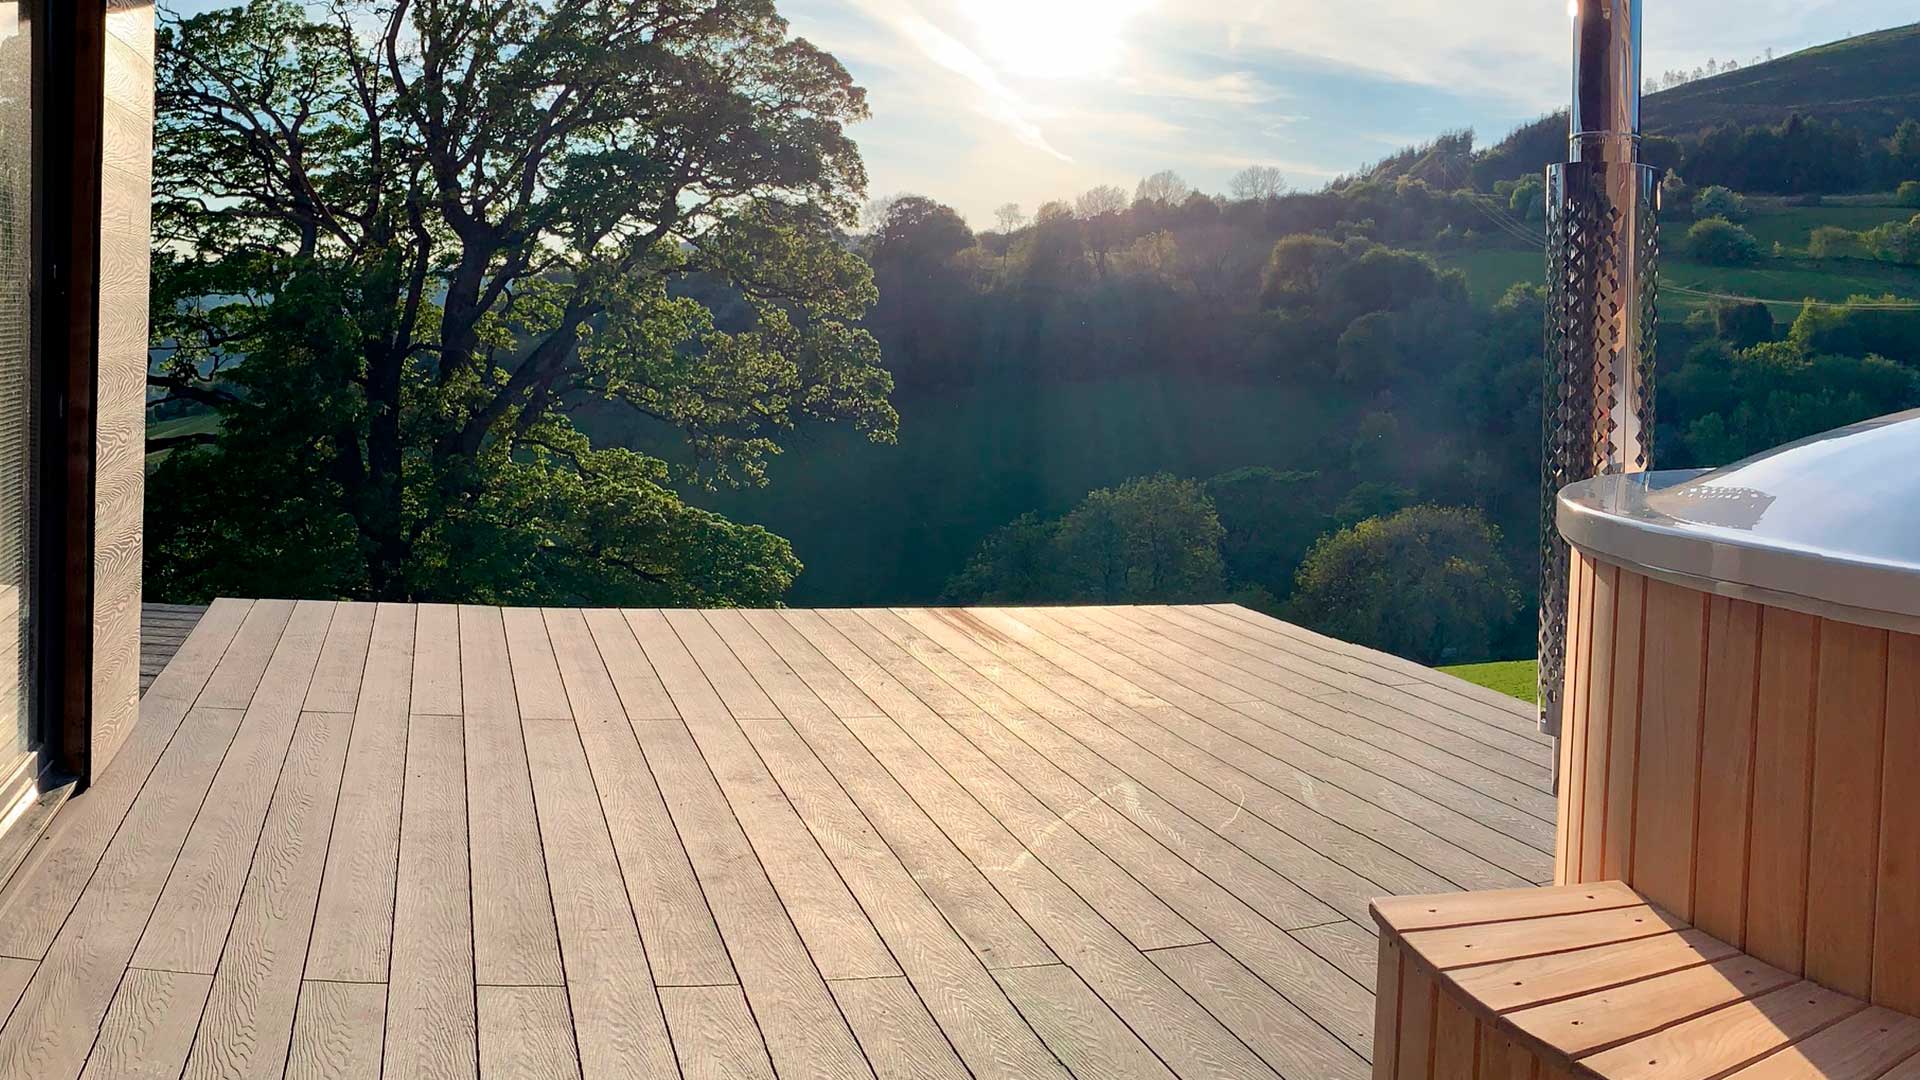 Teckwood | Composite Cladding & Decking Suppliers in the UK